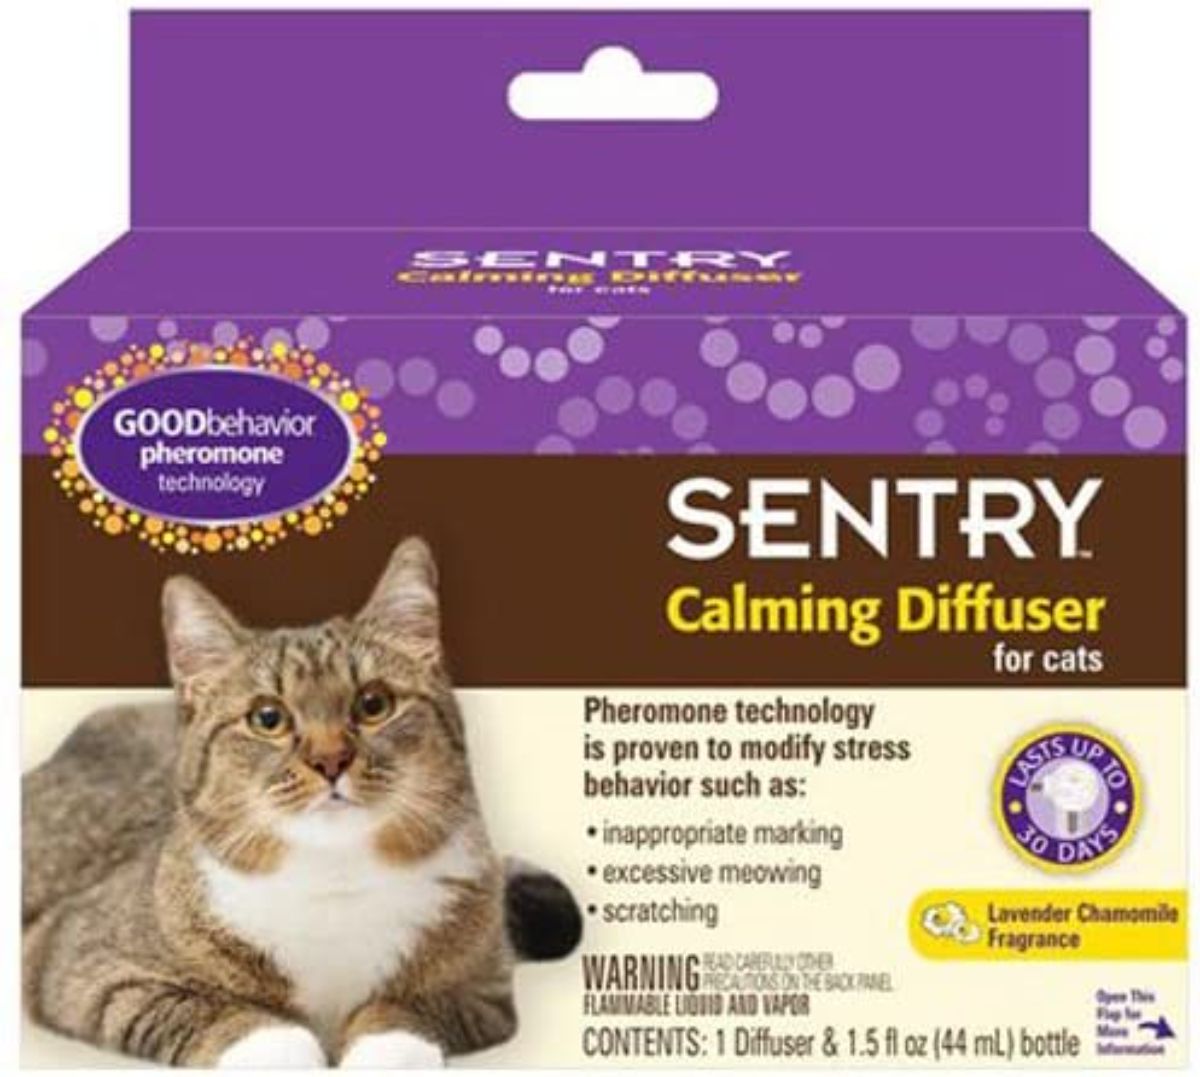 Sentry Calming Diffuser for Cats